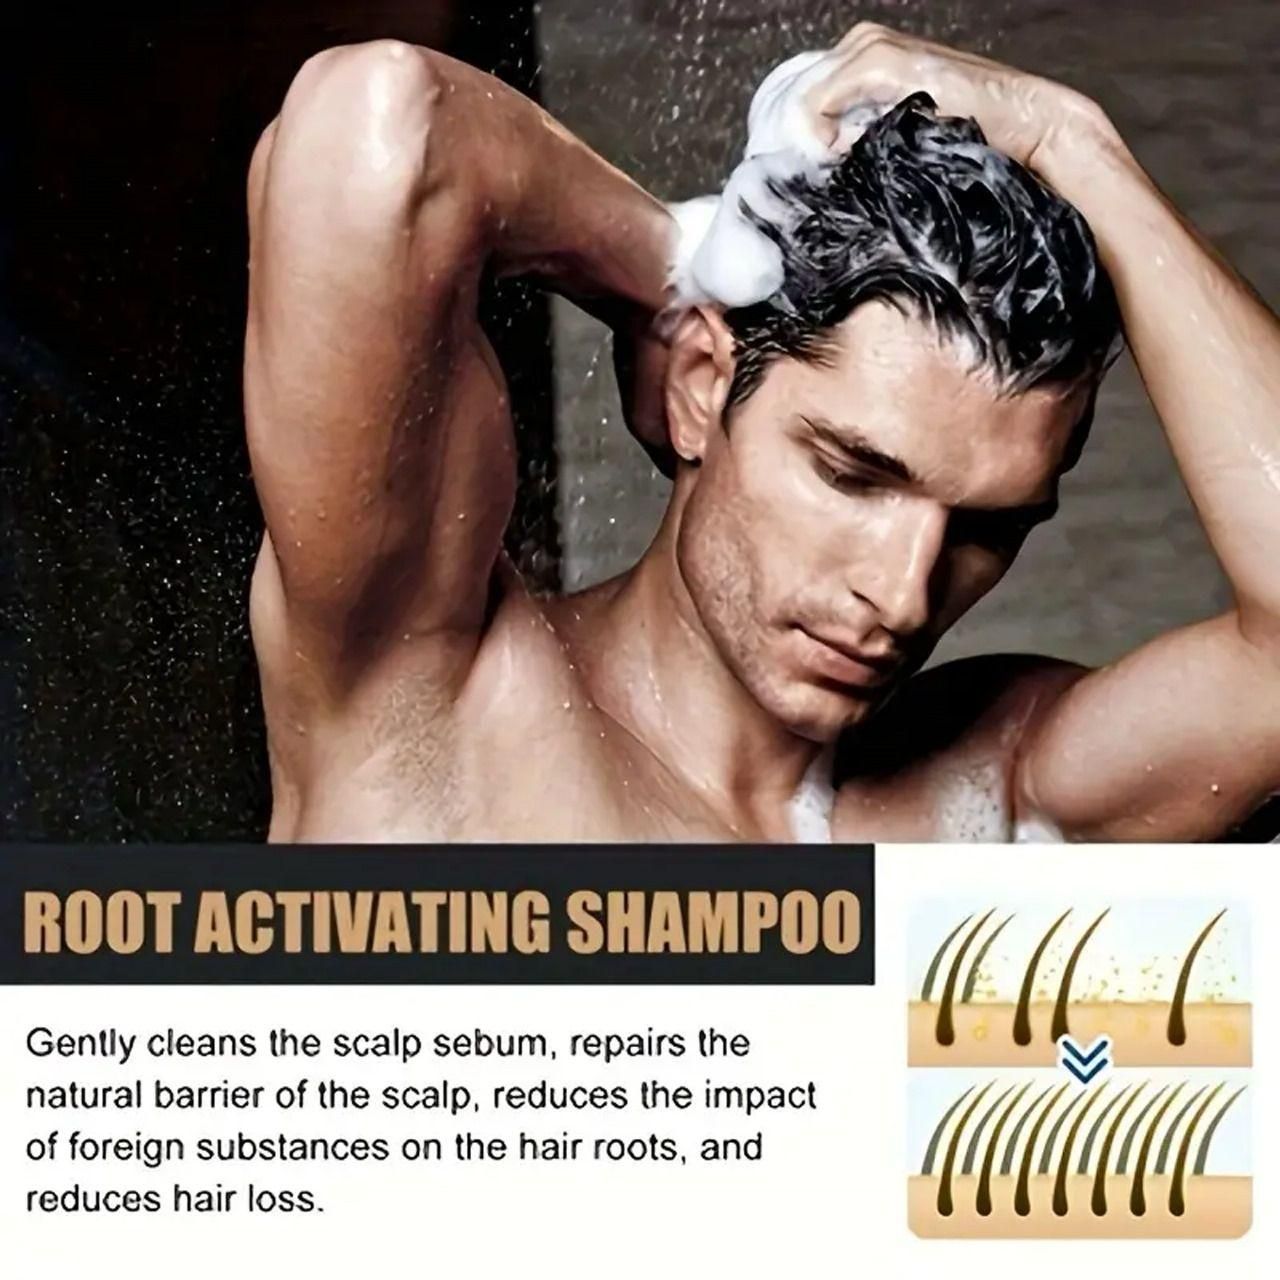 Root Activating Shampoo 100ml - Unleash the Power of Nature for Stronger, Healthier Hair  (Pack Of 2)